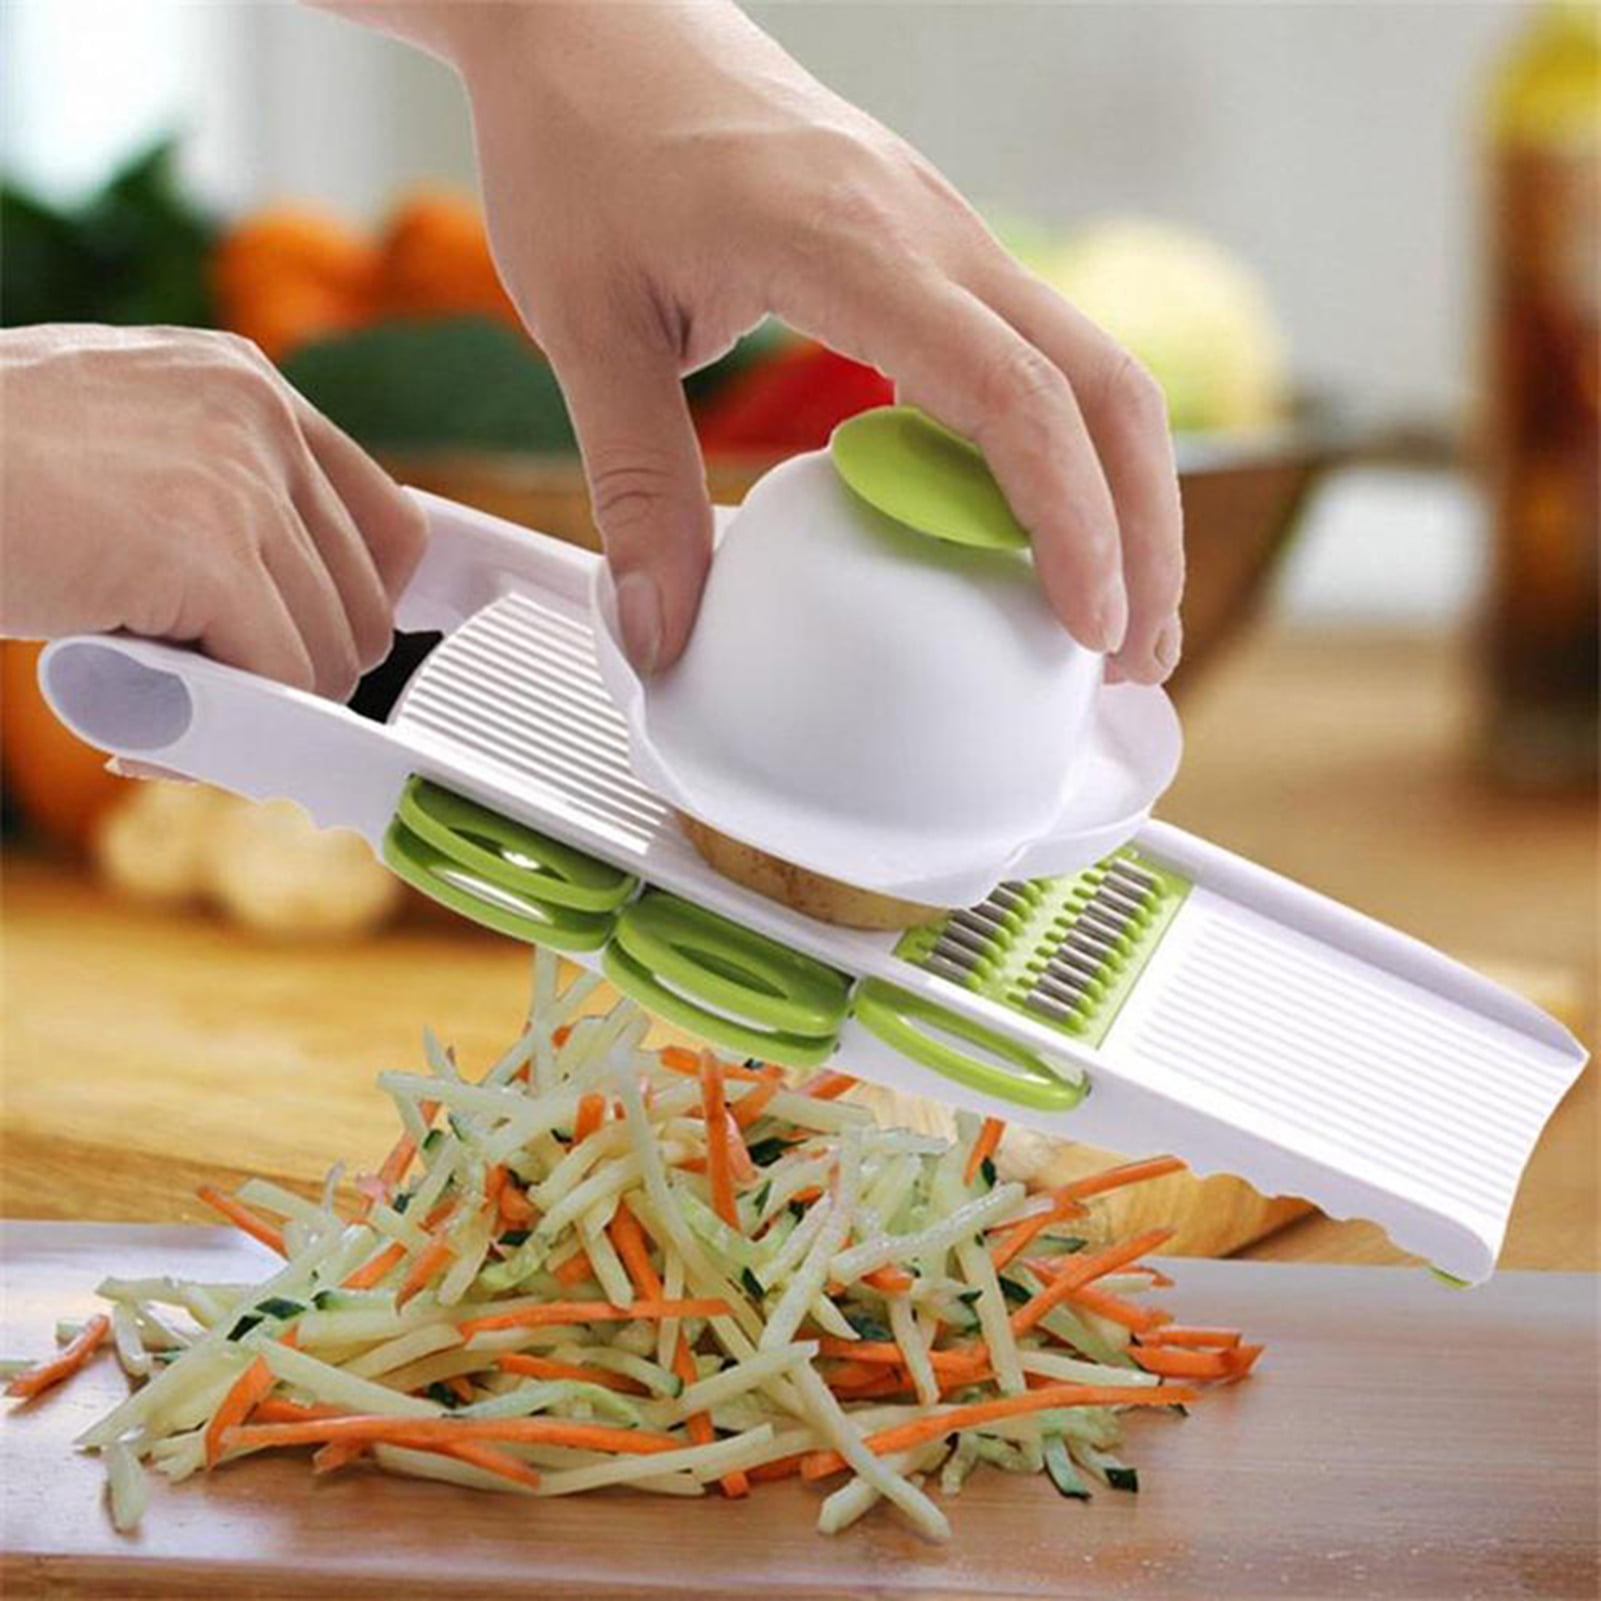  Kitexpert Vegetable Chopper, Onion Chopper Dicer Veggie Chopper  with 7 Blades and Container, 7-in-1 Chopper Vegetable Cutter, Kitchen Vegetable  Slicer Dicer Cutter Food Chopper (Grey): Home & Kitchen